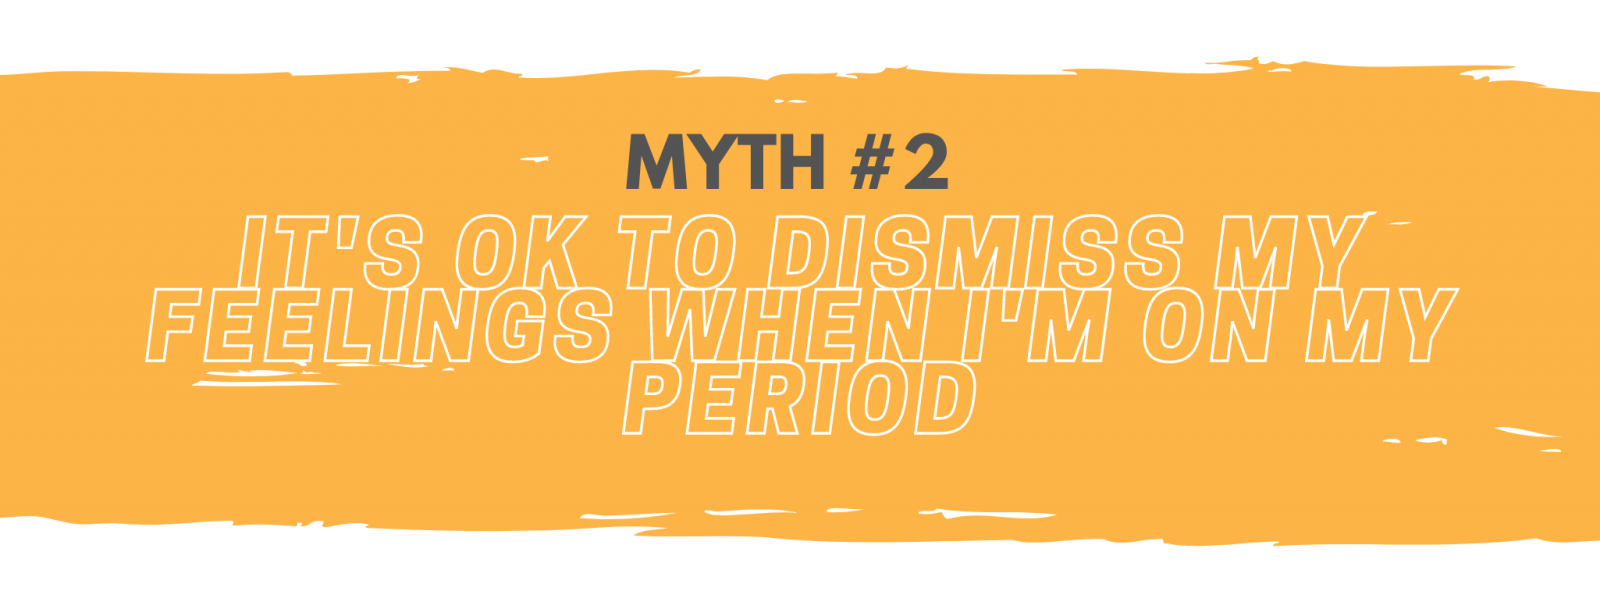 Dismiss feelings during period myth